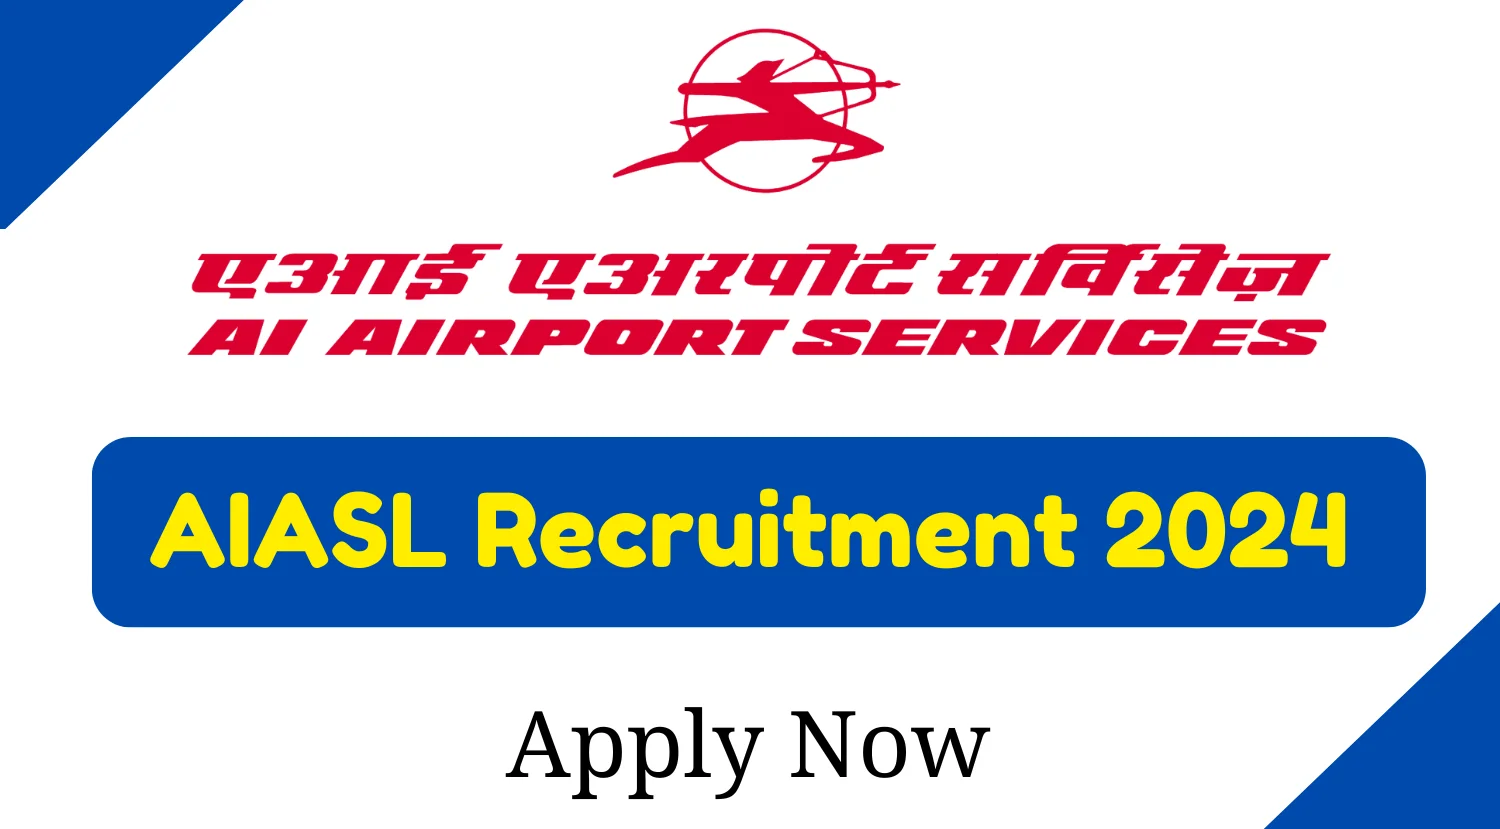 AIASL Jr Officer Customer Services Customer Service Executive Handyman and Others Recruitment 2024